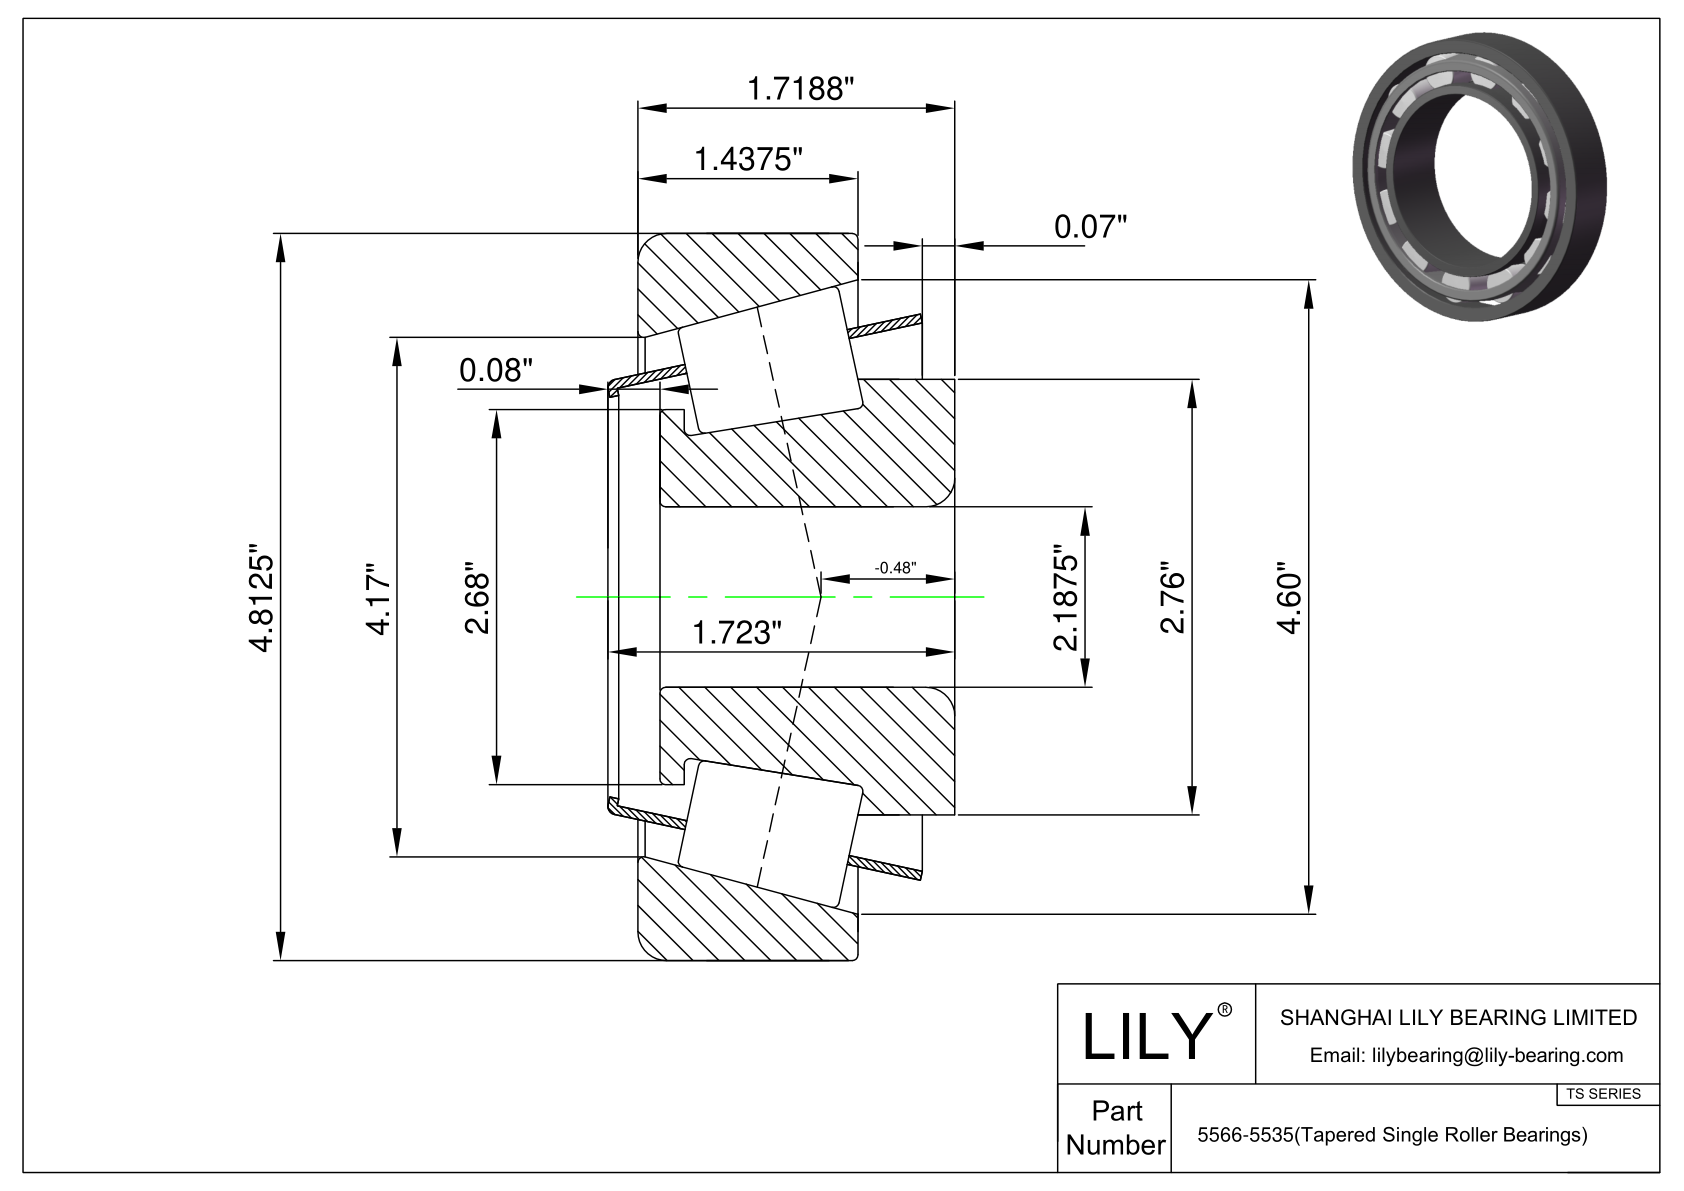 5566-5535 TS (Tapered Single Roller Bearings) (Imperial) cad drawing